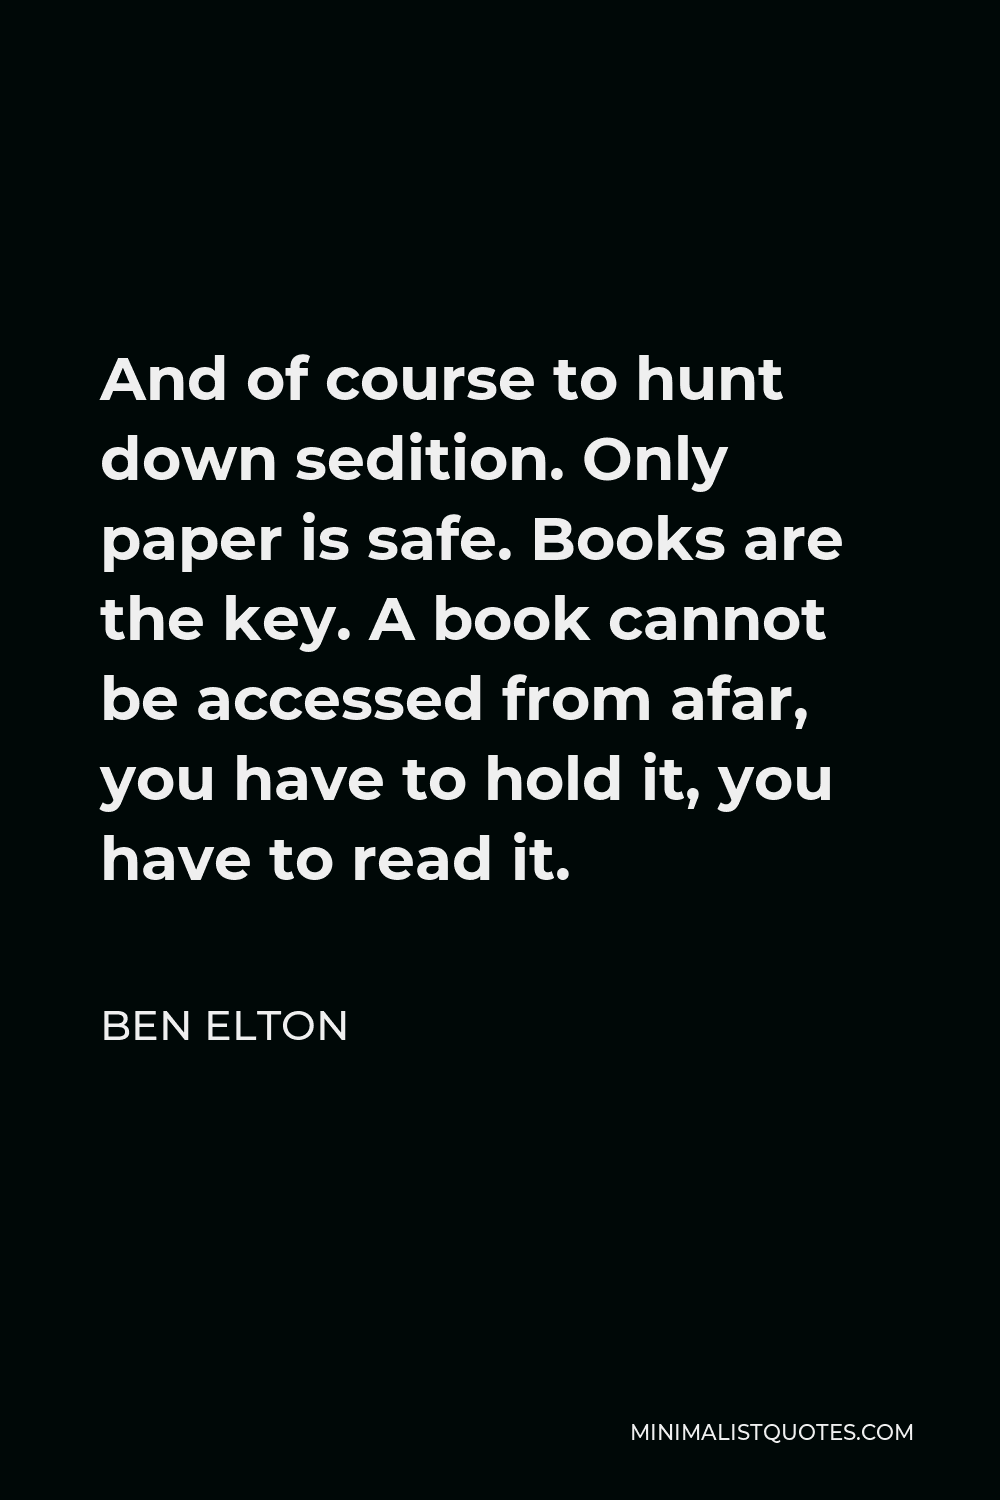 Ben Elton Quote - And of course to hunt down sedition. Only paper is safe. Books are the key. A book cannot be accessed from afar, you have to hold it, you have to read it.